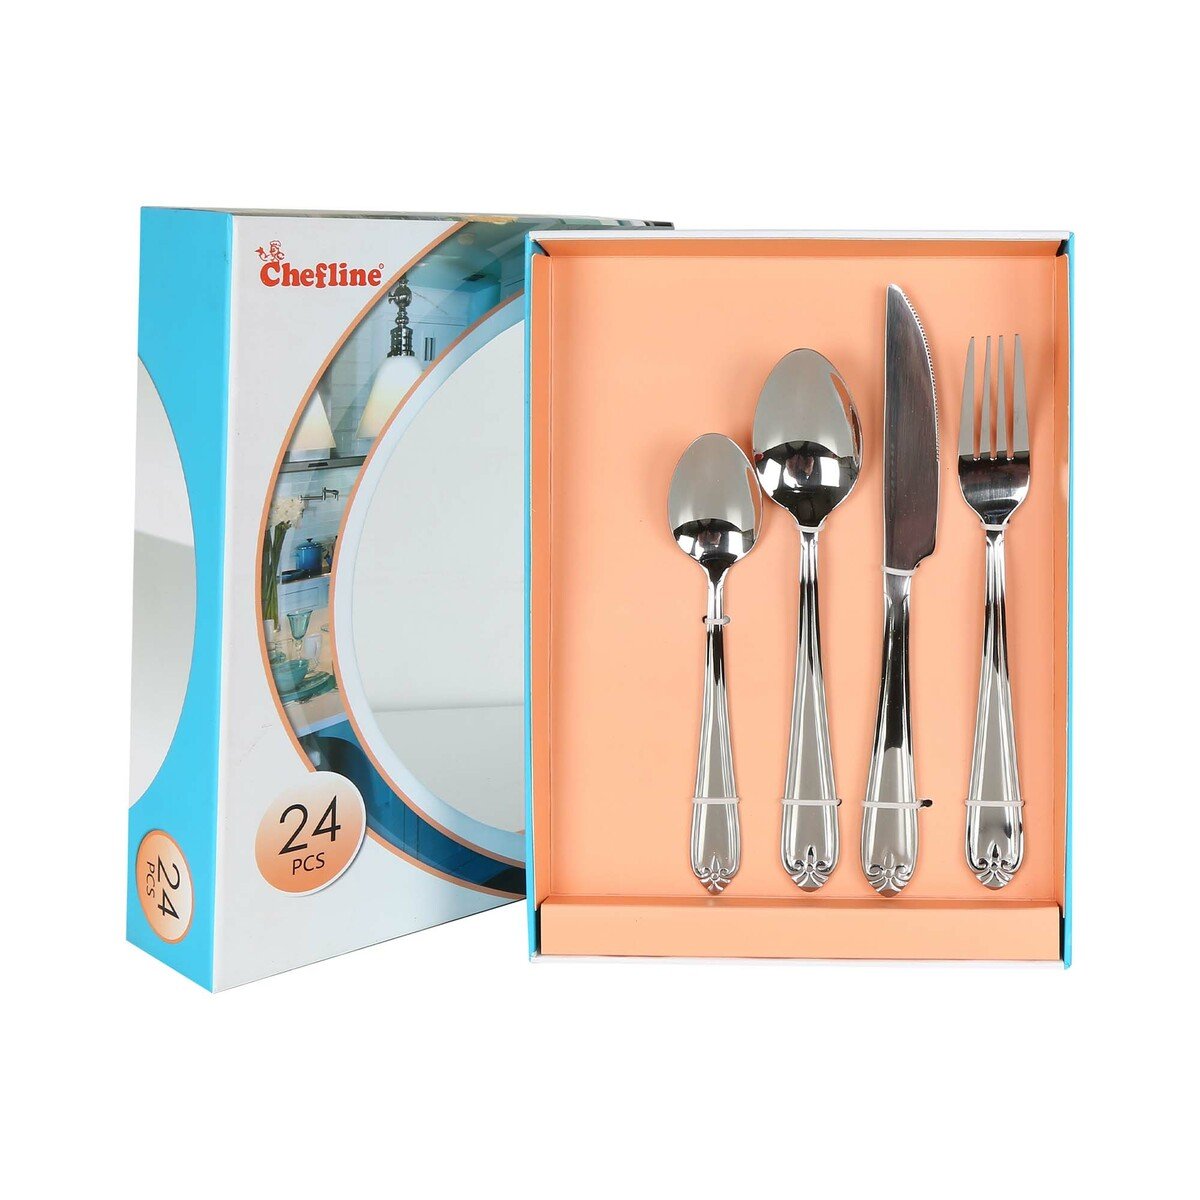 Chefline Stainless Steel Cutlery Set 24pcs FT-1534